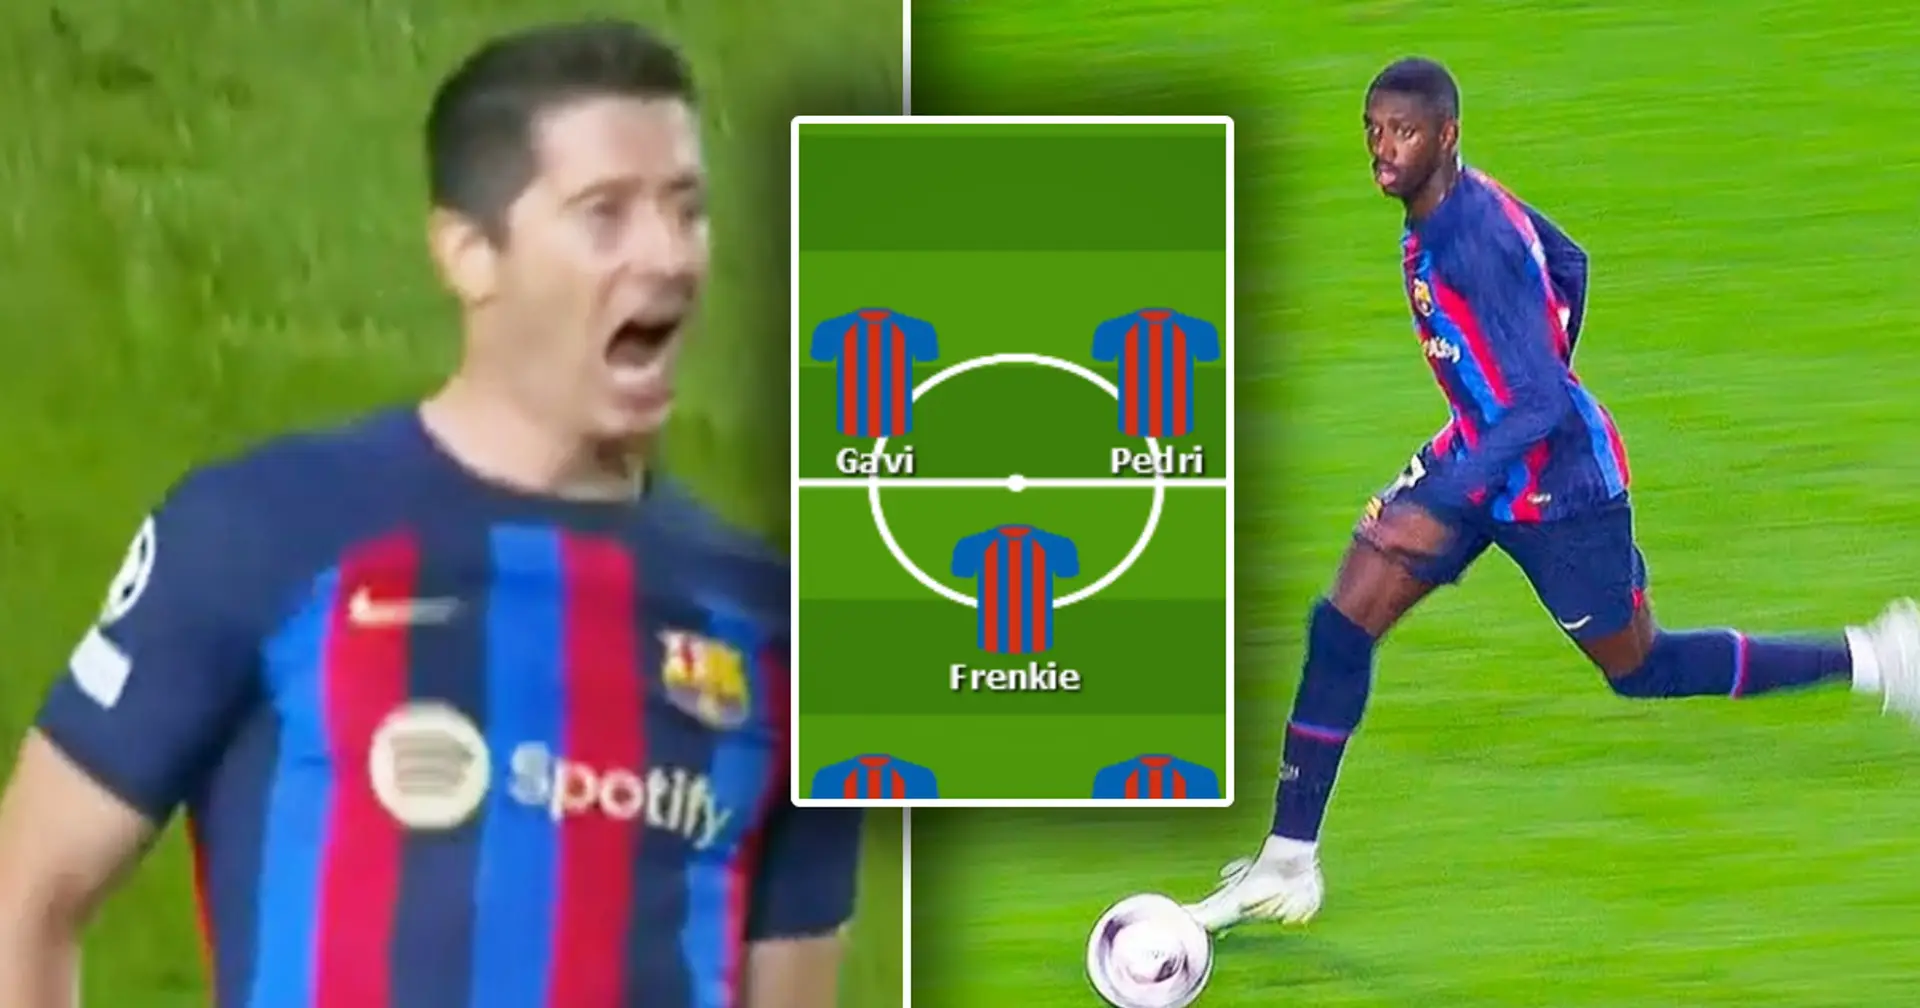 Dembele displaces Raphinha, Pedri in: Barca's best XI when injured players are fit